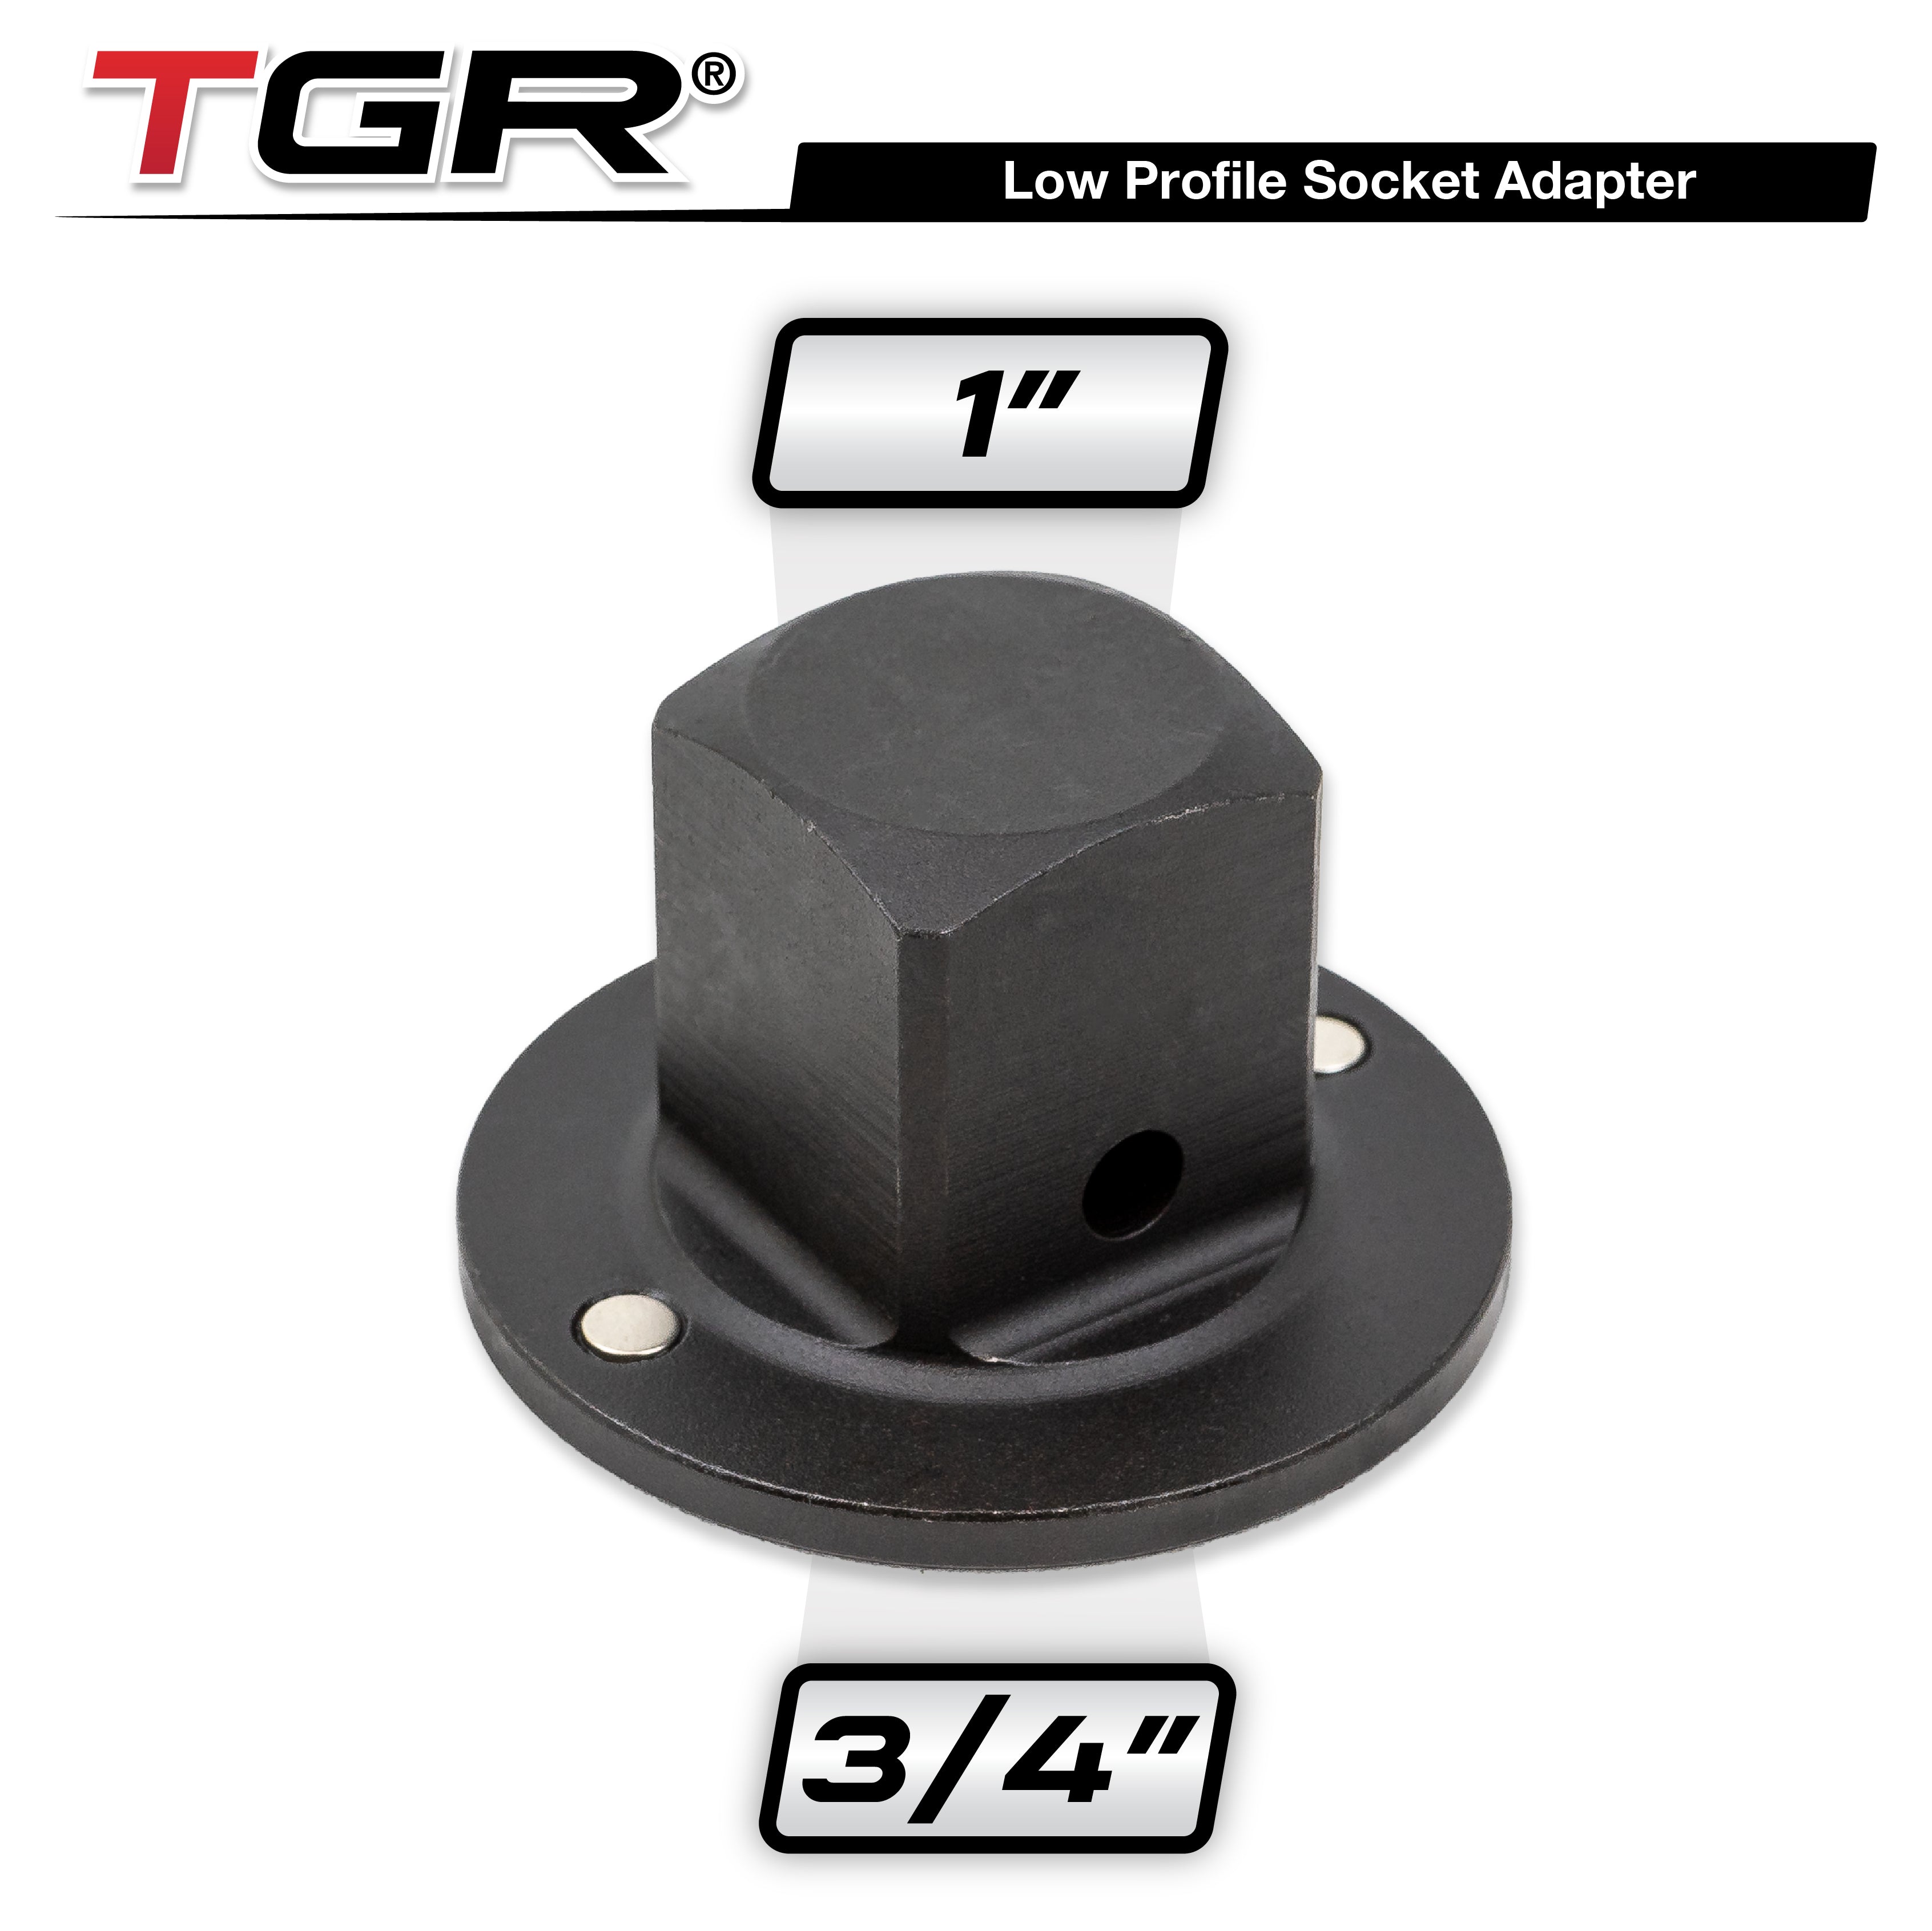 TGR 3/4" to 1" Low Profile Impact Socket Adapter - Drive Reducing